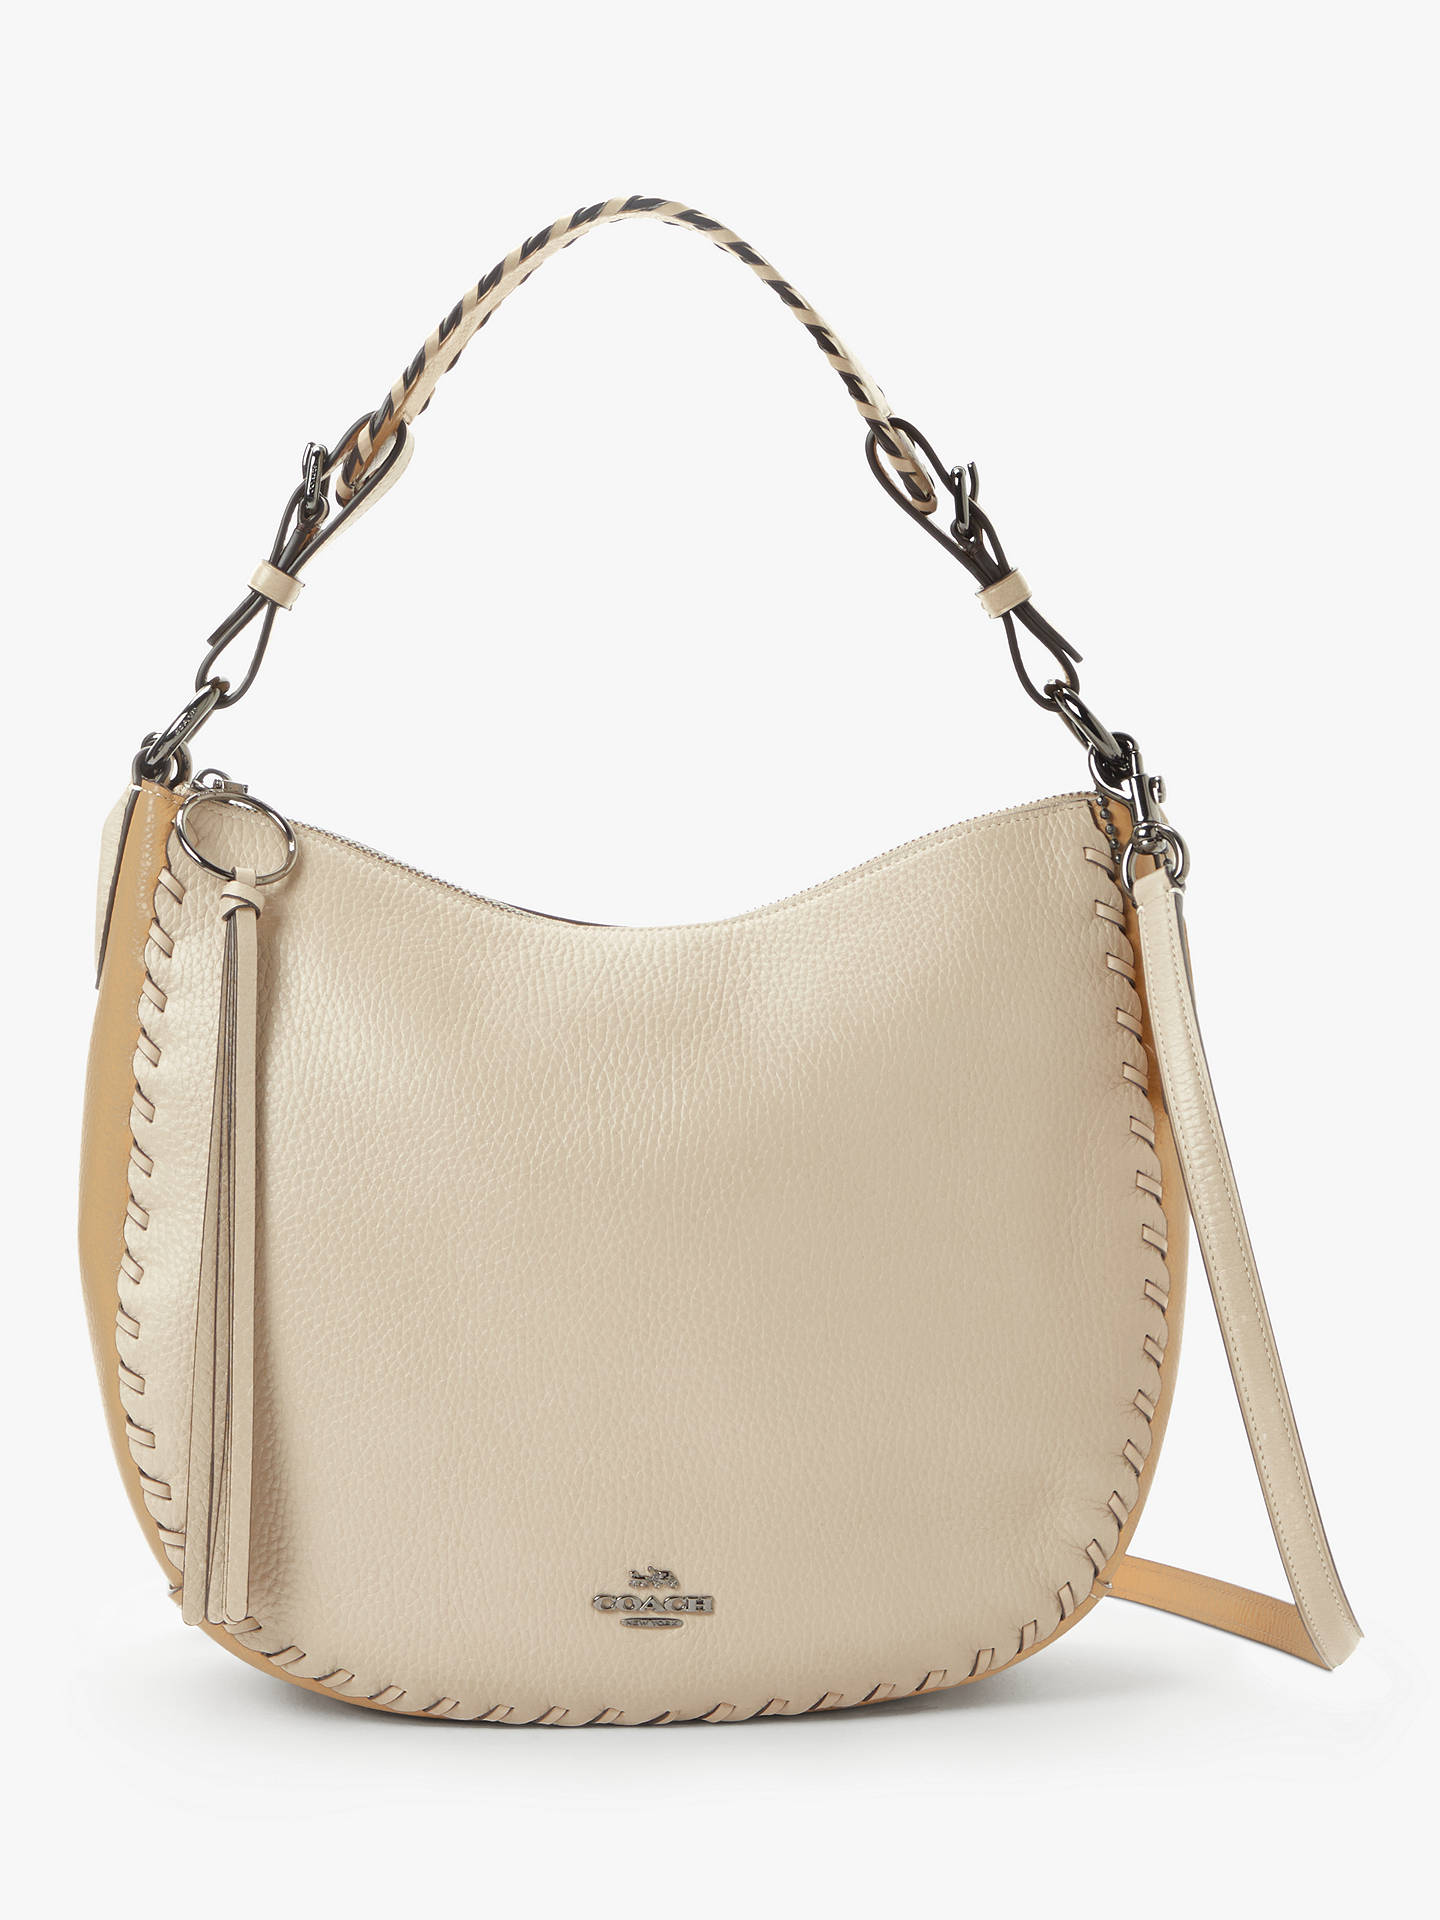 Coach Sutton Whipstitch Pebbled Leather Hobo Bag, Ivory/Multi at John Lewis & Partners